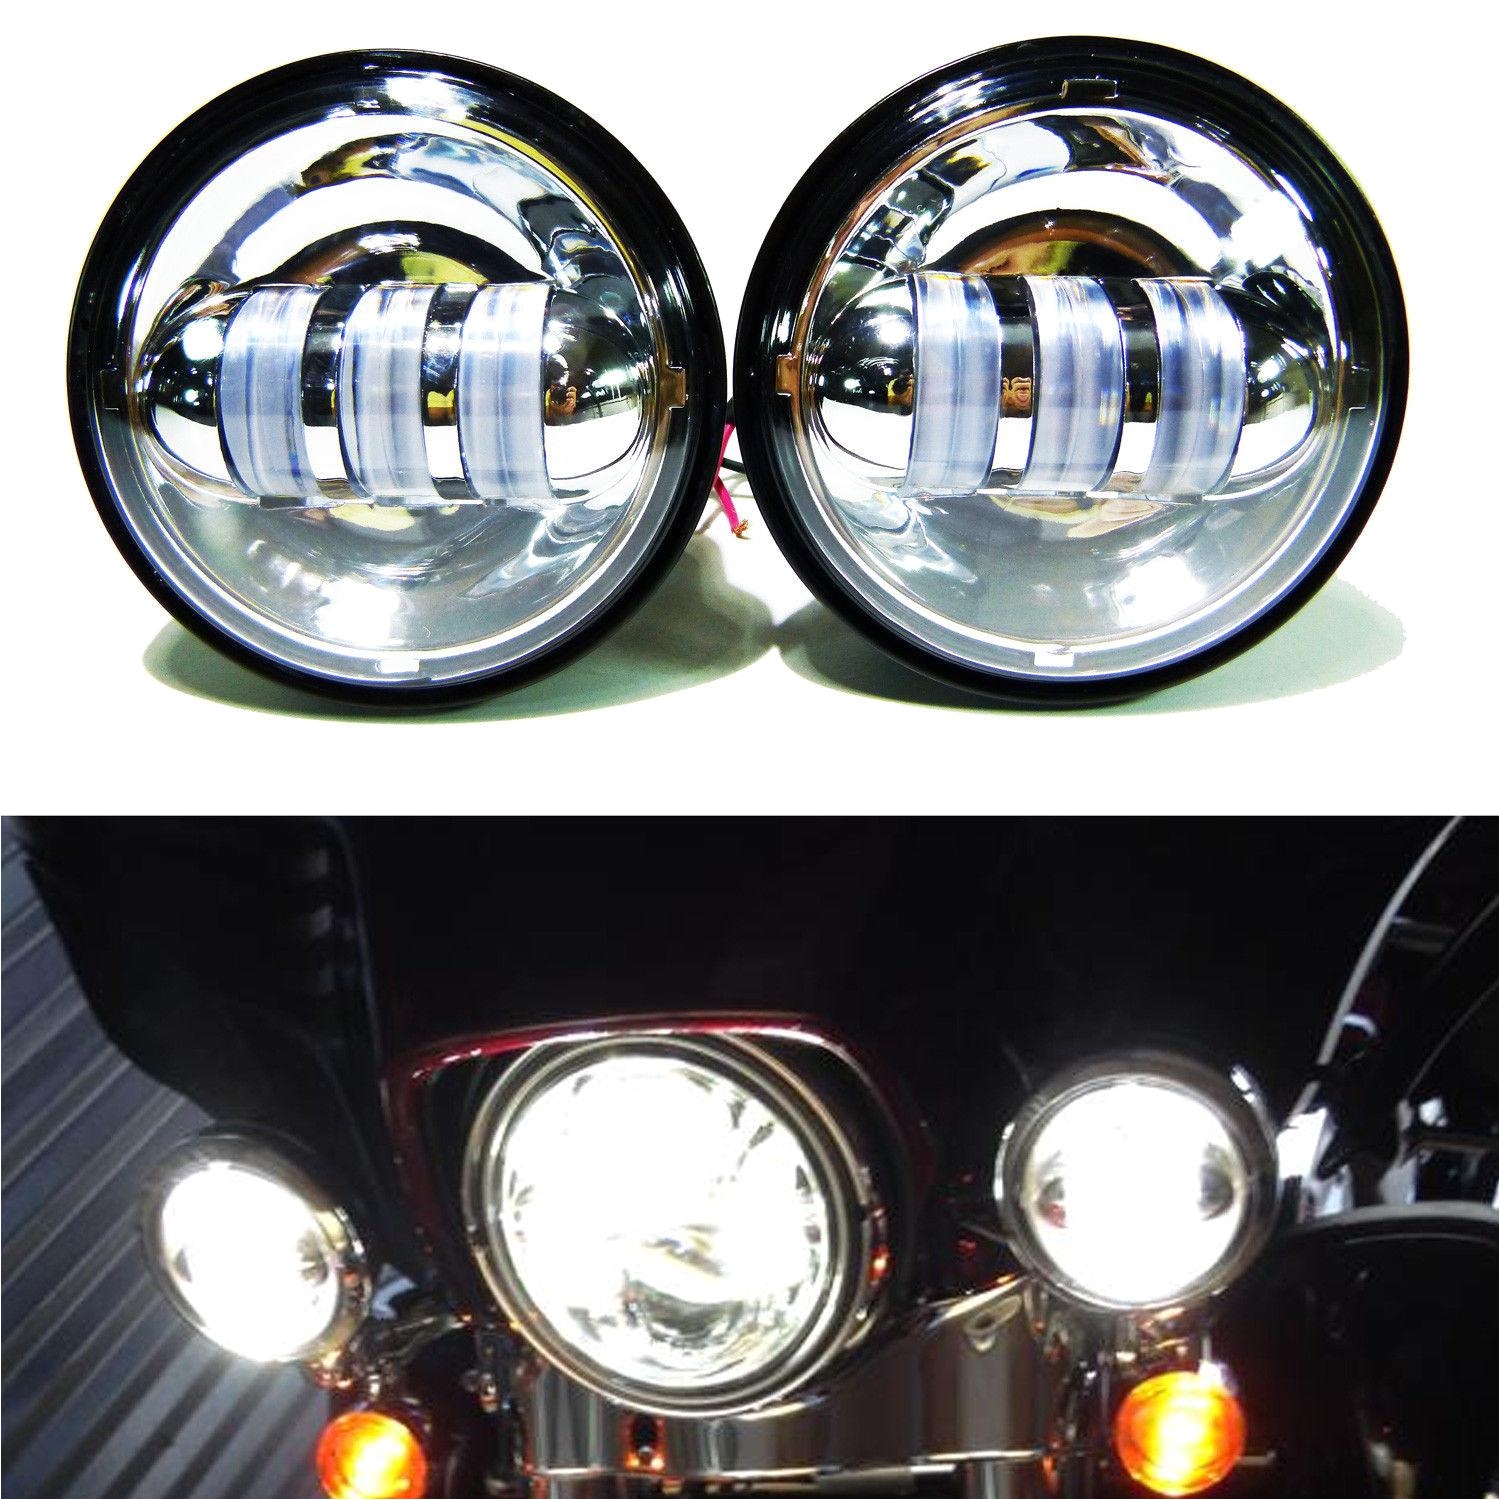 2018 4 1 2 chrome led auxiliary spot fog passing light lamp bulb motorcycle daymaker projector spot driving lamp for harley motorcycle fog lamp from